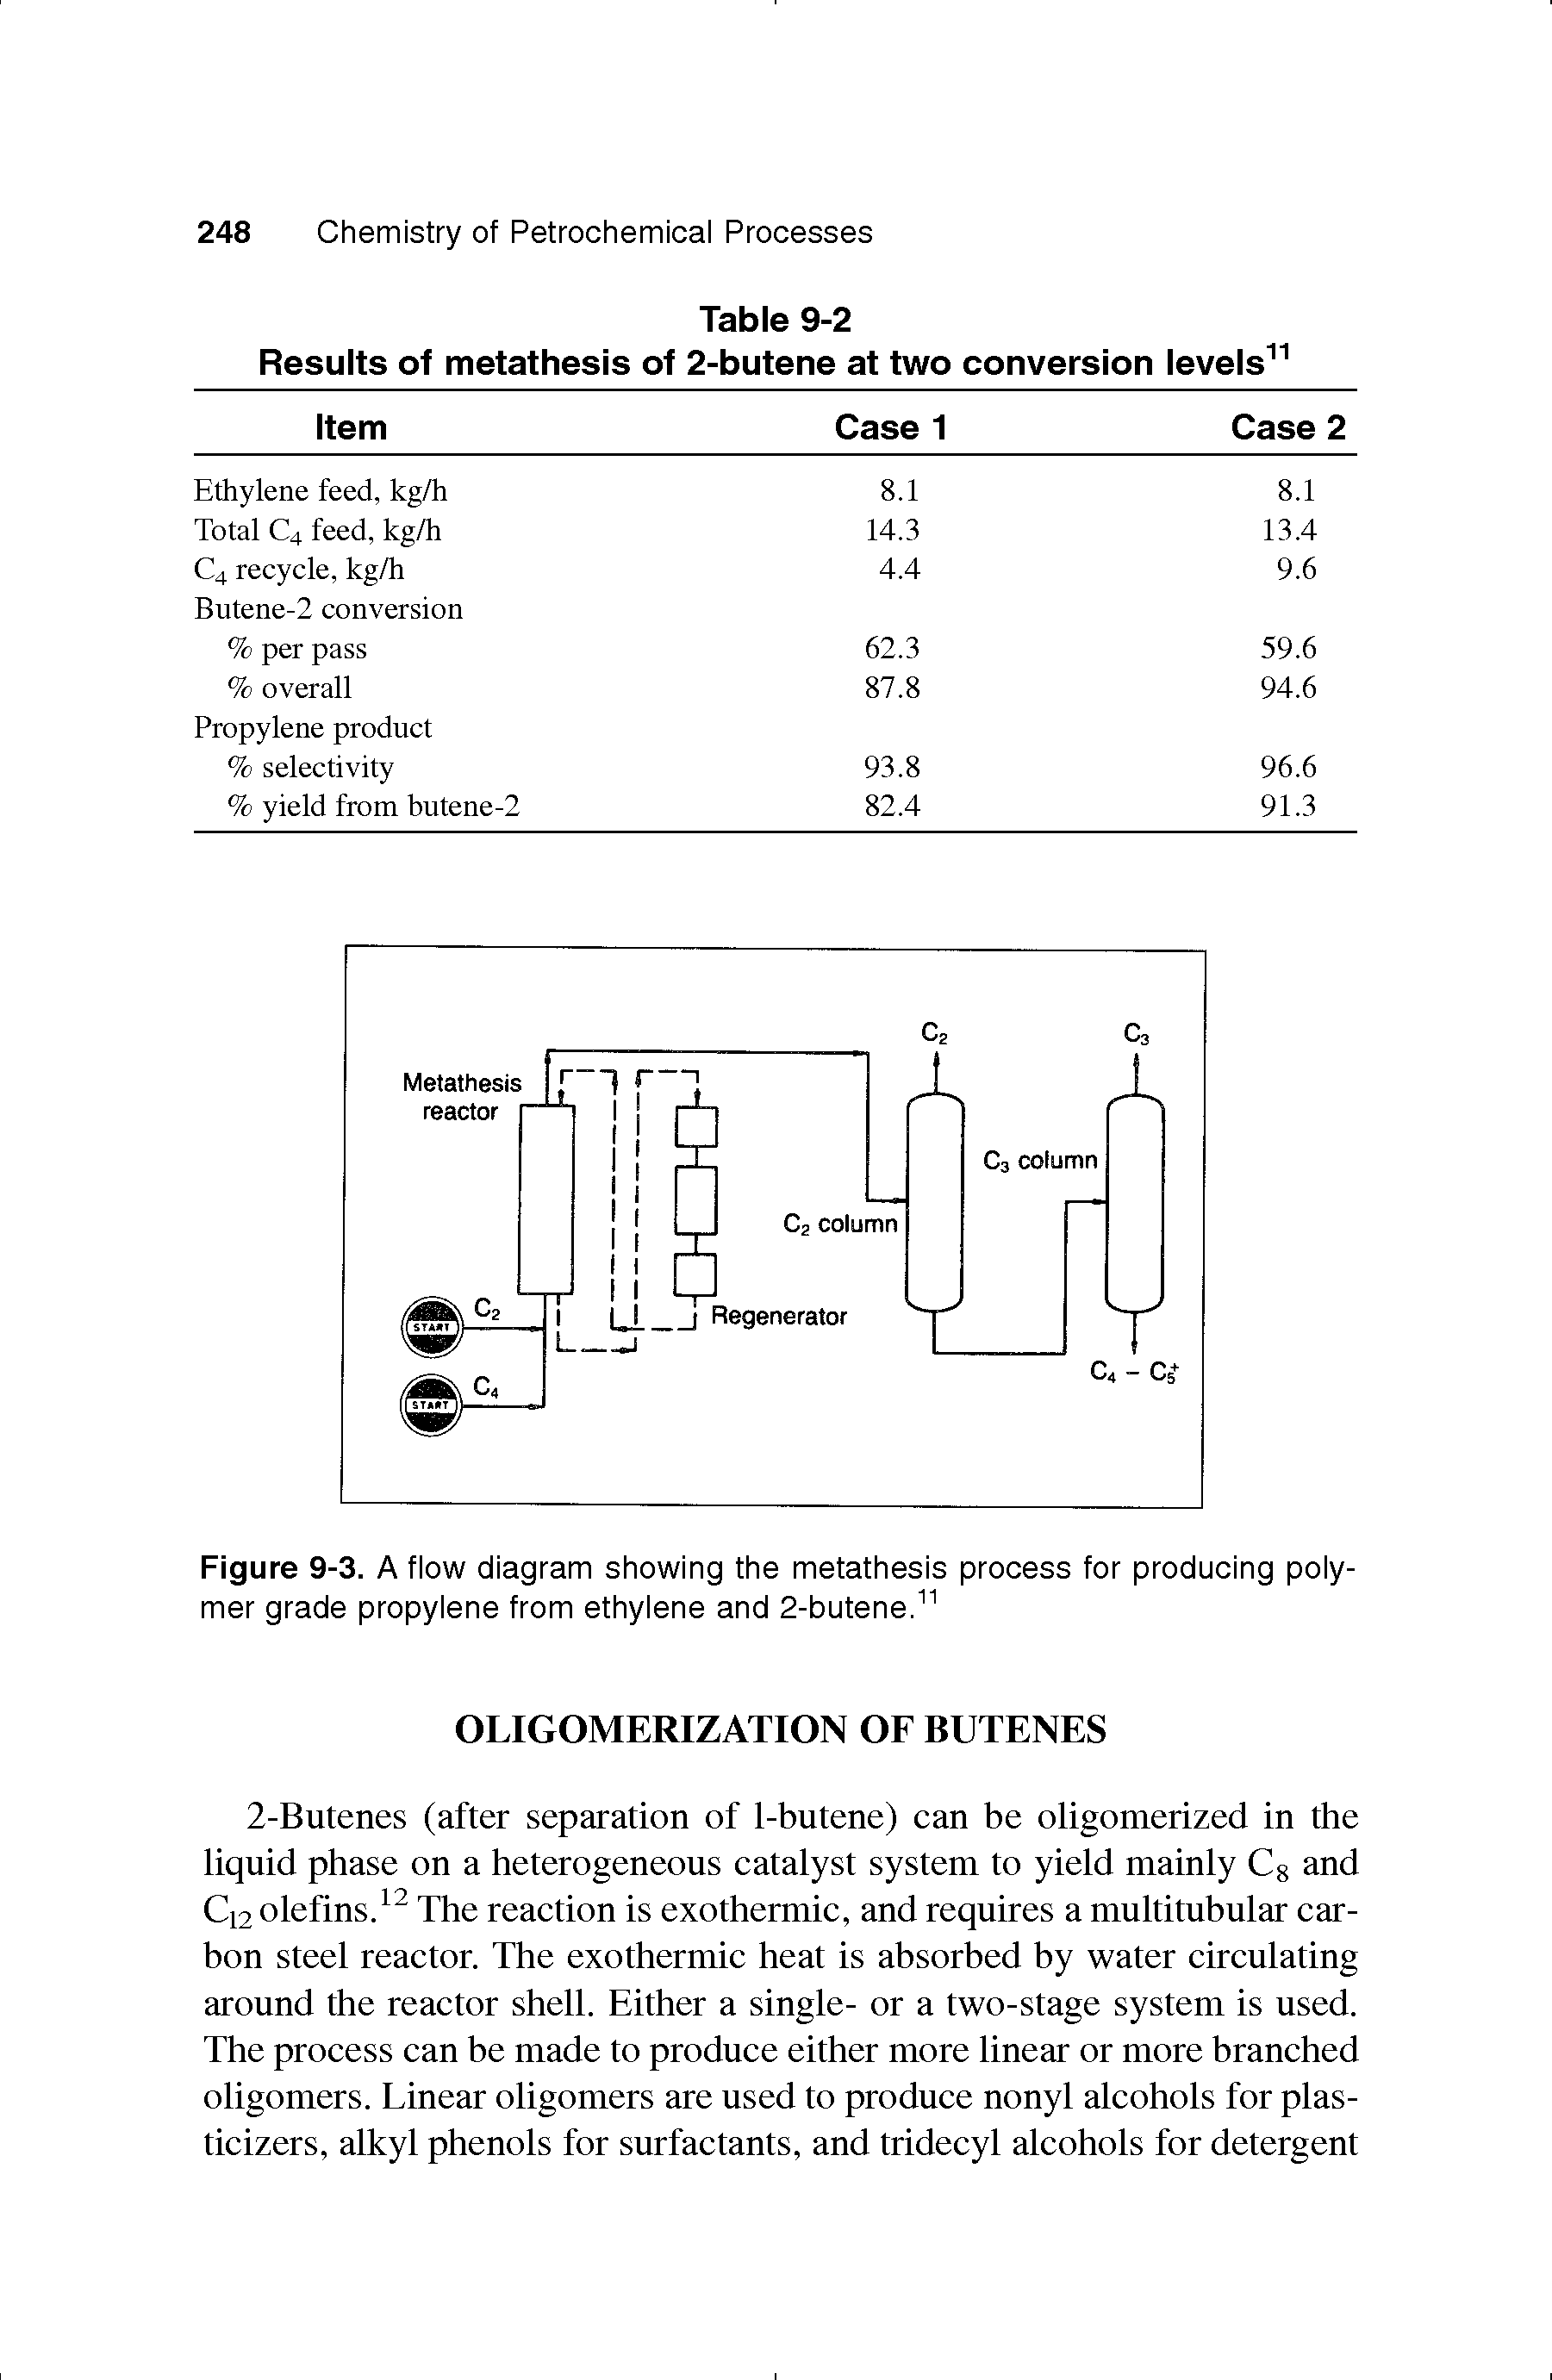 Figure 9-3. A flow diagram showing the metathesis process for producing polymer grade propylene from ethylene and 2-butene.